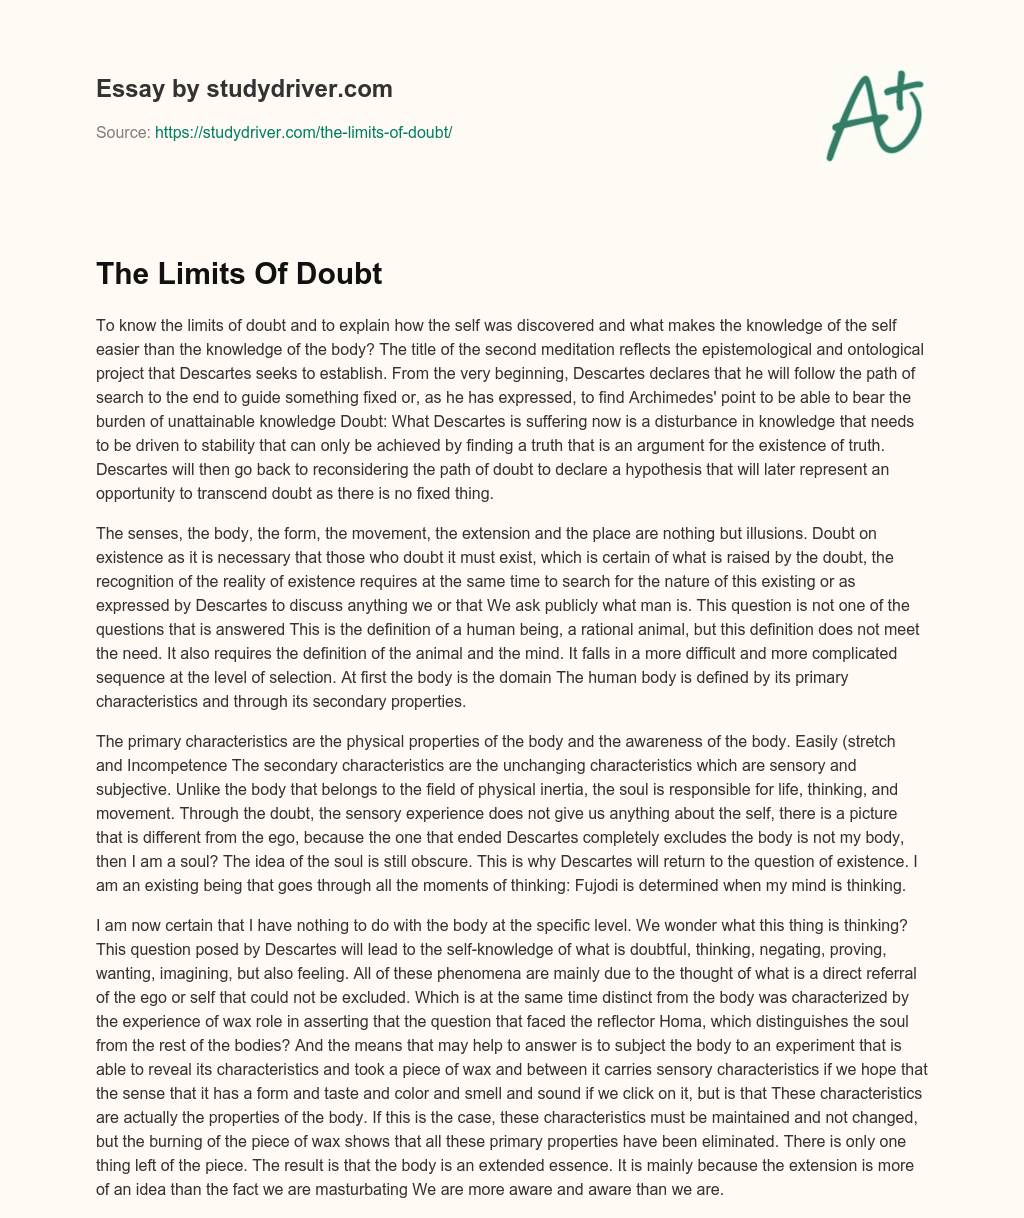 The Limits of Doubt essay